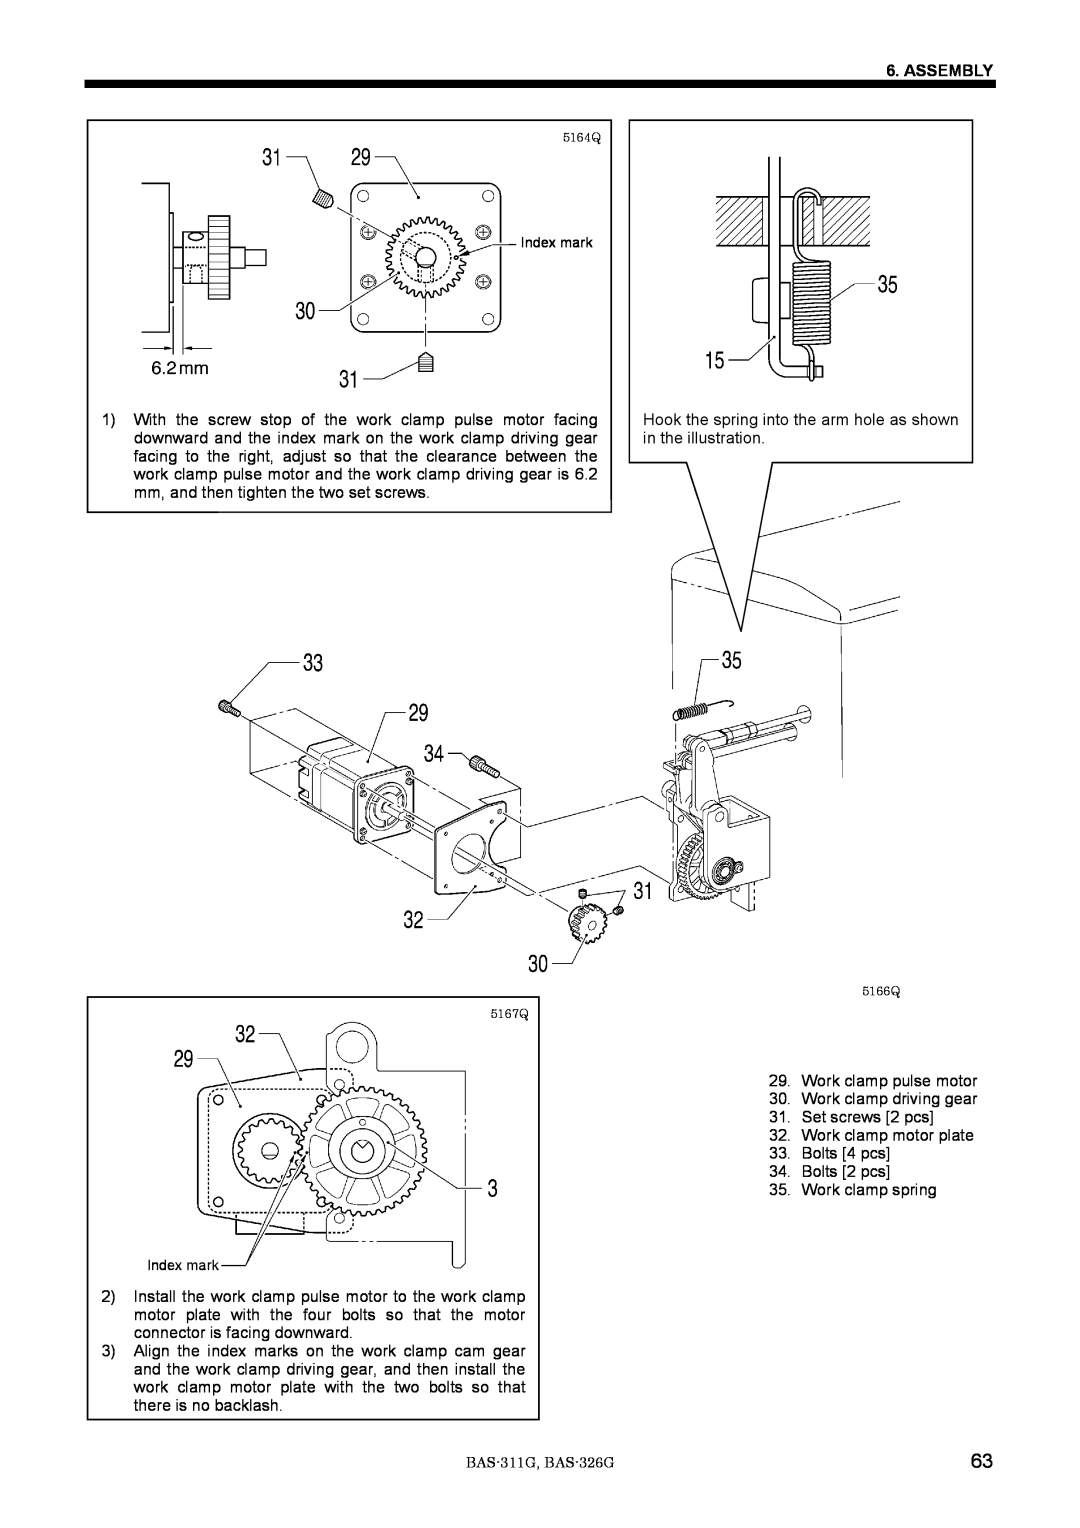 Brother BAS-311G service manual Assembly, Hook the spring into the arm hole as shown in the illustration 